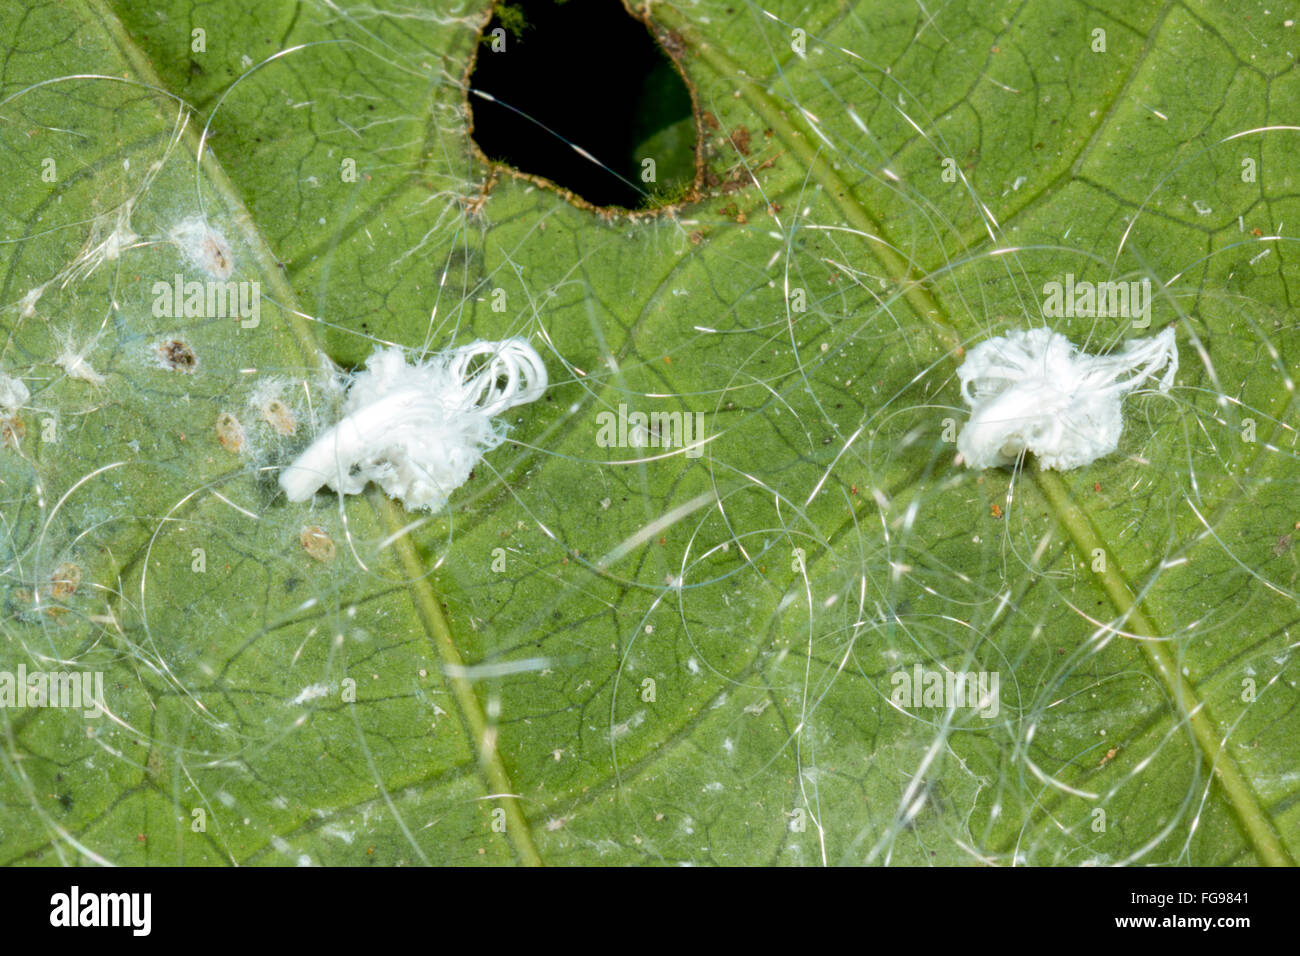 Tiny planthoppers, possibly family Derbidae, surrounded by wax secretions on the underside of a leaf in Pastaza province Ecuador Stock Photo